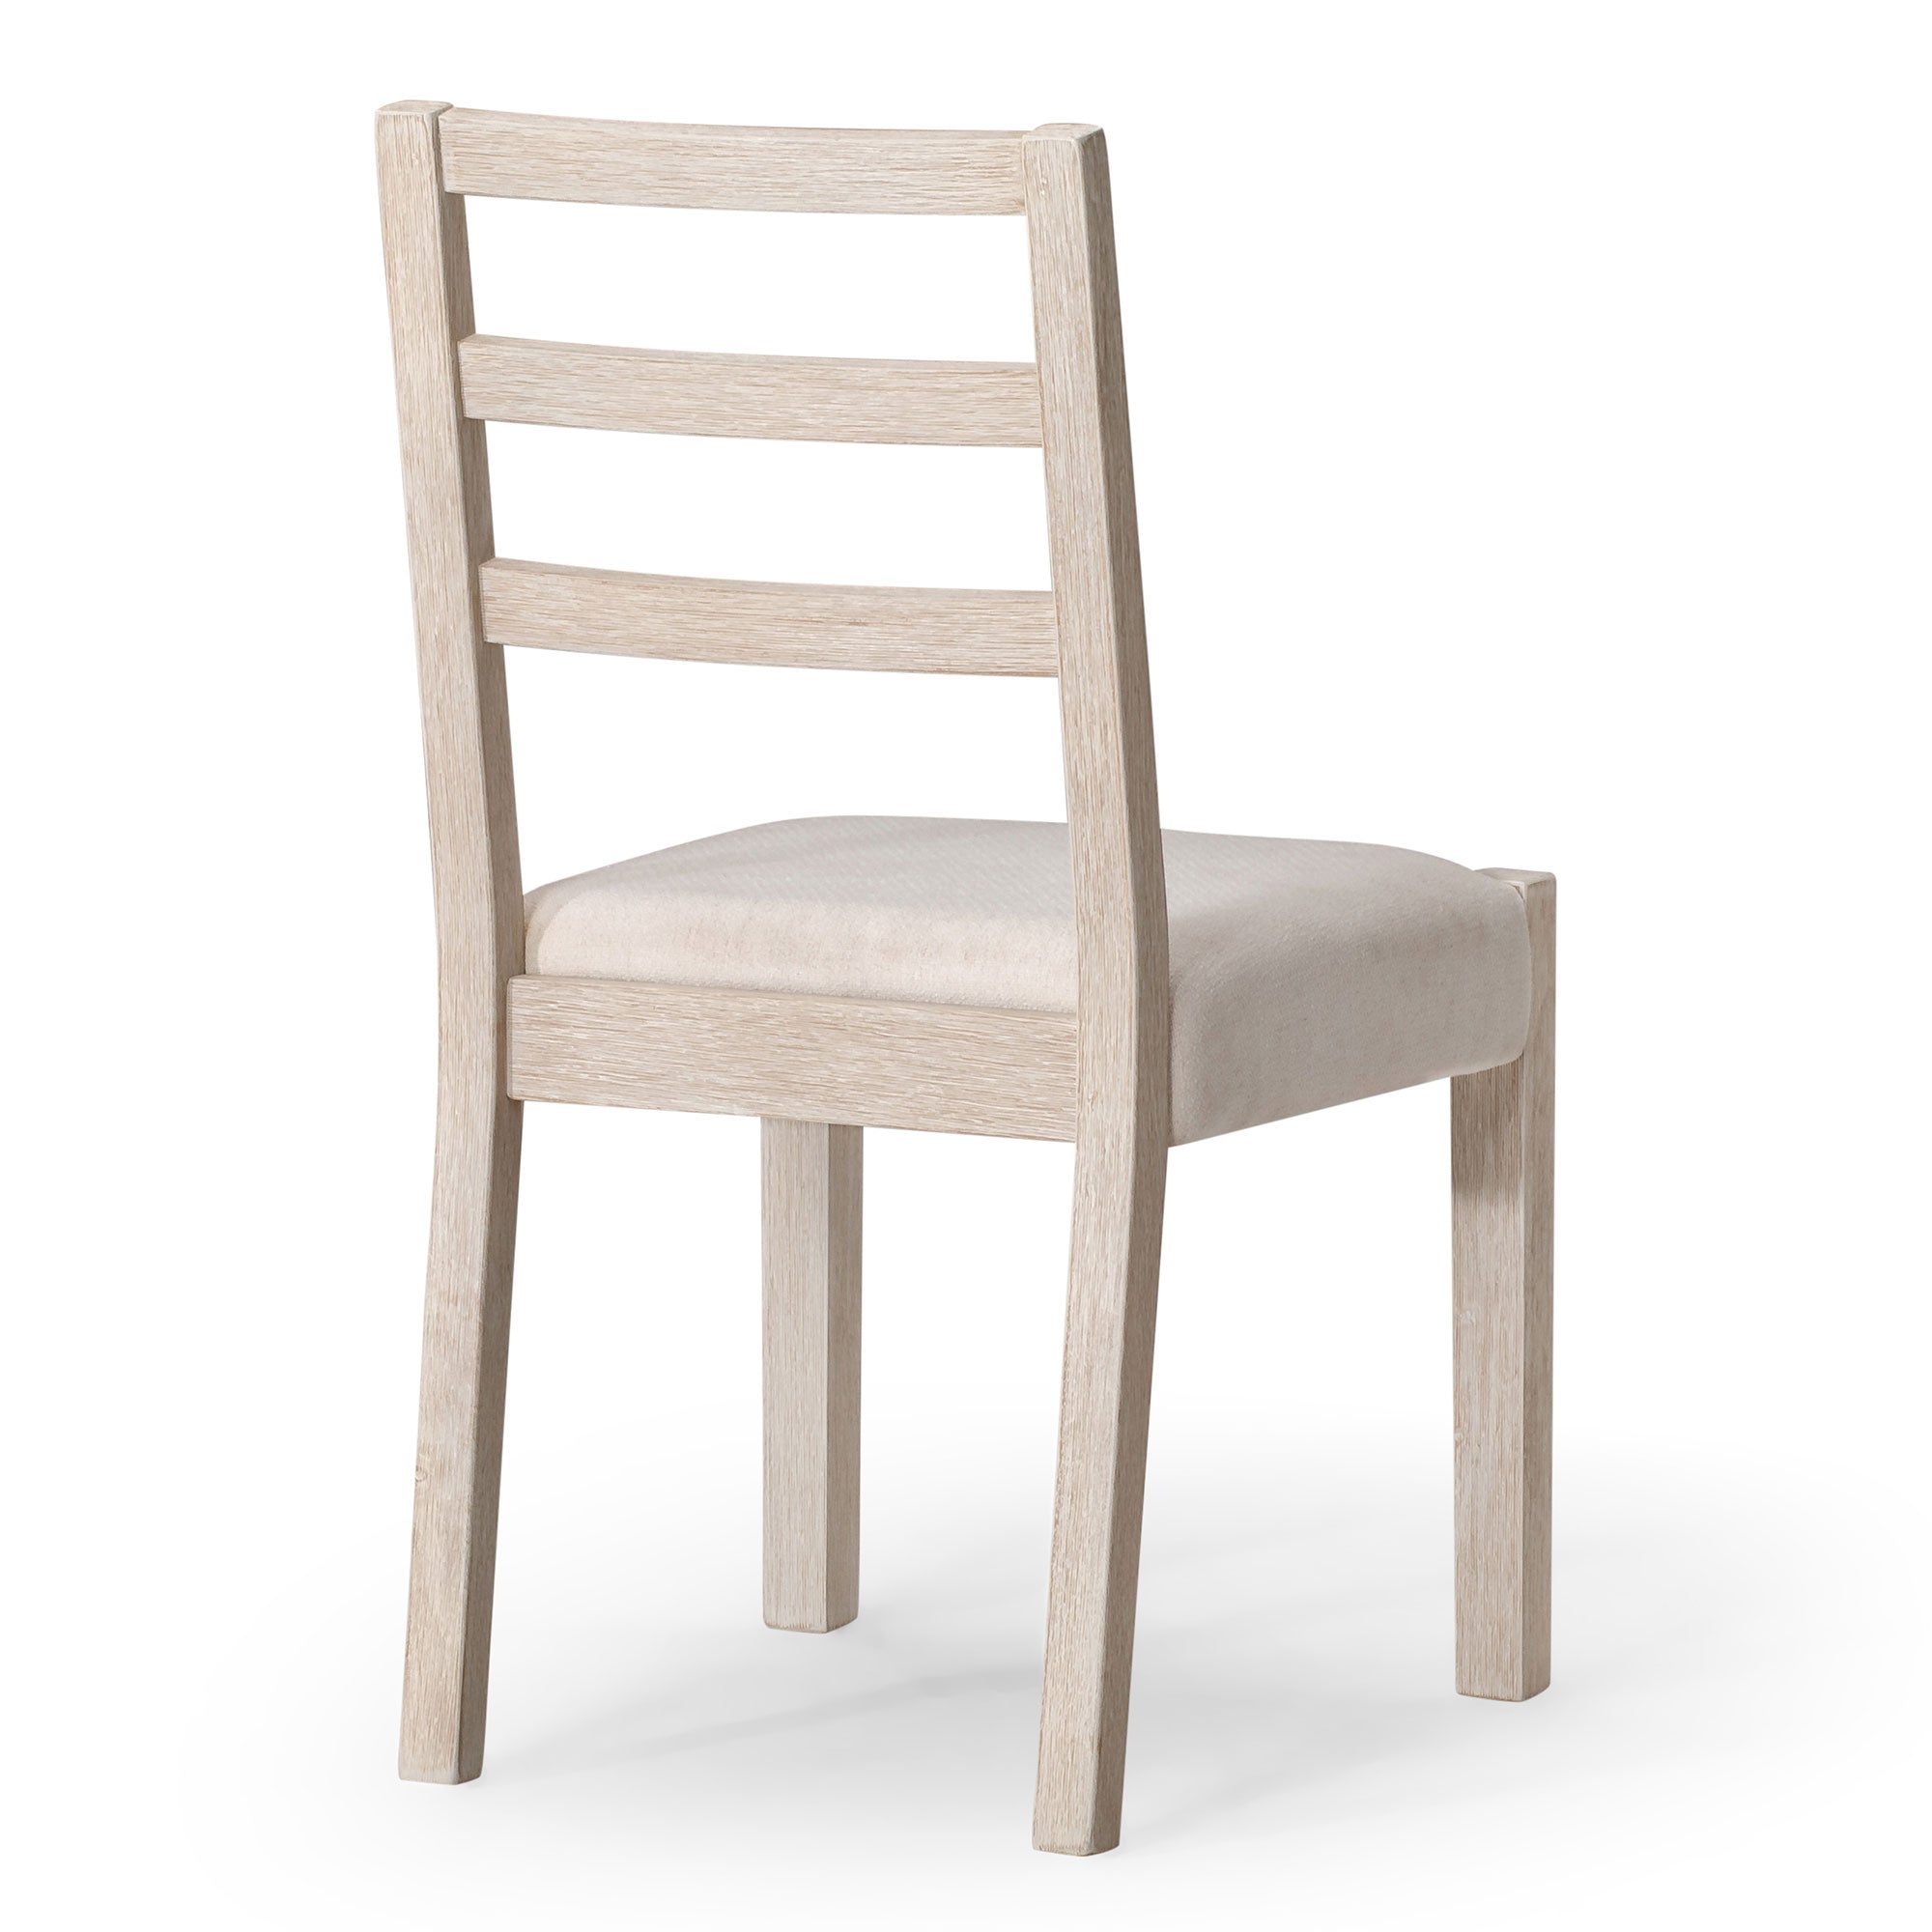 Willow Organic Wooden Dining Chair in Weathered White Finish with Cream Weave Fabric Upholstery, Set of 2 in Dining Furniture by Maven Lane